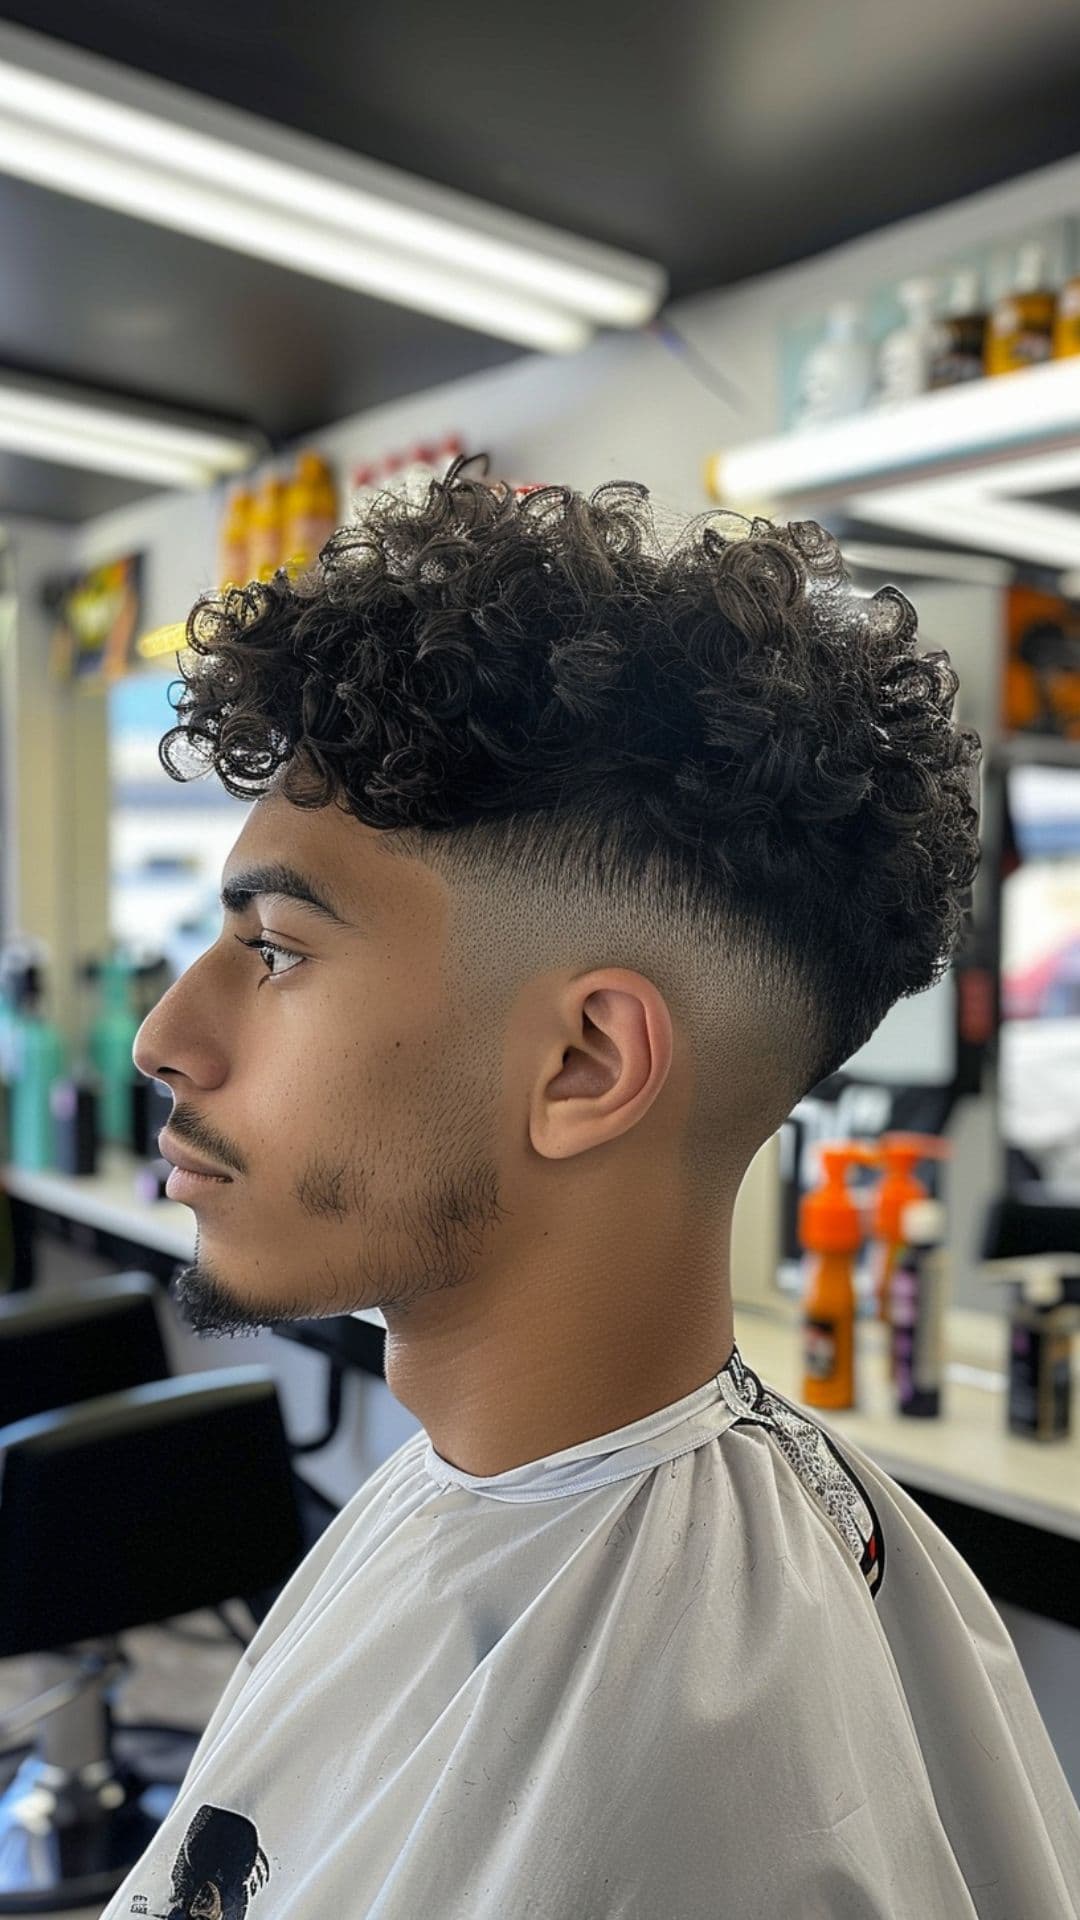 A man modelling a curly fringe hairstyle.